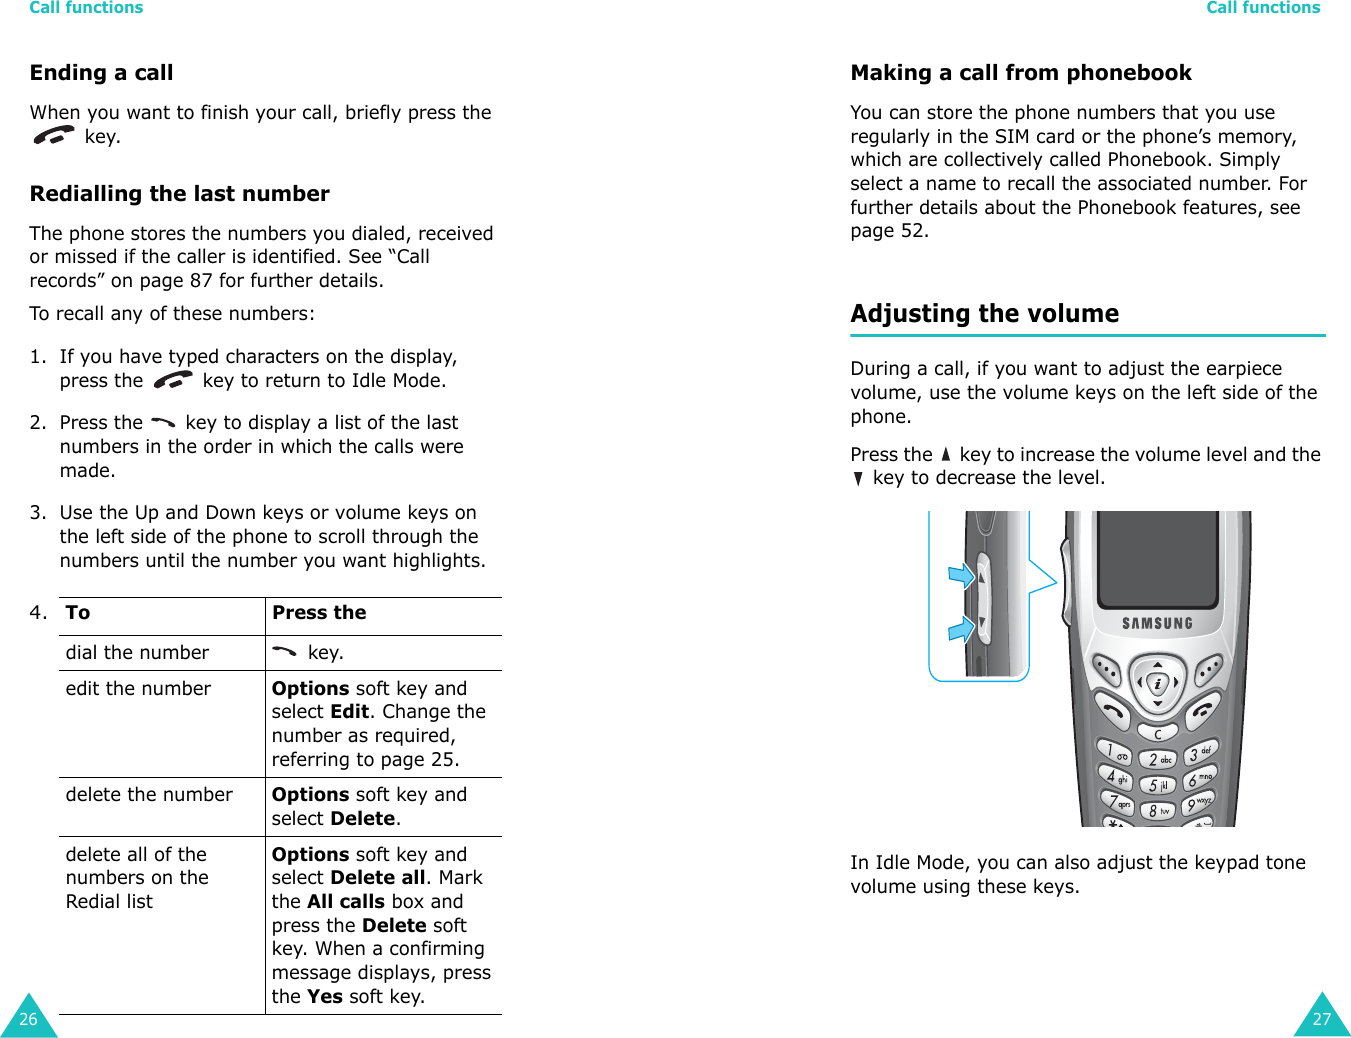 Call functions26Ending a callWhen you want to finish your call, briefly press the  key.Redialling the last numberThe phone stores the numbers you dialed, received or missed if the caller is identified. See “Call records” on page 87 for further details. To recall any of these numbers:1. If you have typed characters on the display, press the   key to return to Idle Mode.2. Press the   key to display a list of the last numbers in the order in which the calls were made.3. Use the Up and Down keys or volume keys on the left side of the phone to scroll through the numbers until the number you want highlights.4.   ToPress thedial the number   key.edit the number Options soft key and select Edit. Change the number as required, referring to page 25.delete the number Options soft key and select Delete.delete all of the numbers on the Redial list Options soft key and select Delete all. Mark the All calls box and press the Delete soft key. When a confirming message displays, press the Yes soft key.Call functions27Making a call from phonebookYou can store the phone numbers that you use regularly in the SIM card or the phone’s memory, which are collectively called Phonebook. Simply select a name to recall the associated number. For further details about the Phonebook features, see page 52.Adjusting the volumeDuring a call, if you want to adjust the earpiece volume, use the volume keys on the left side of the phone. Press the   key to increase the volume level and the  key to decrease the level.In Idle Mode, you can also adjust the keypad tone volume using these keys.